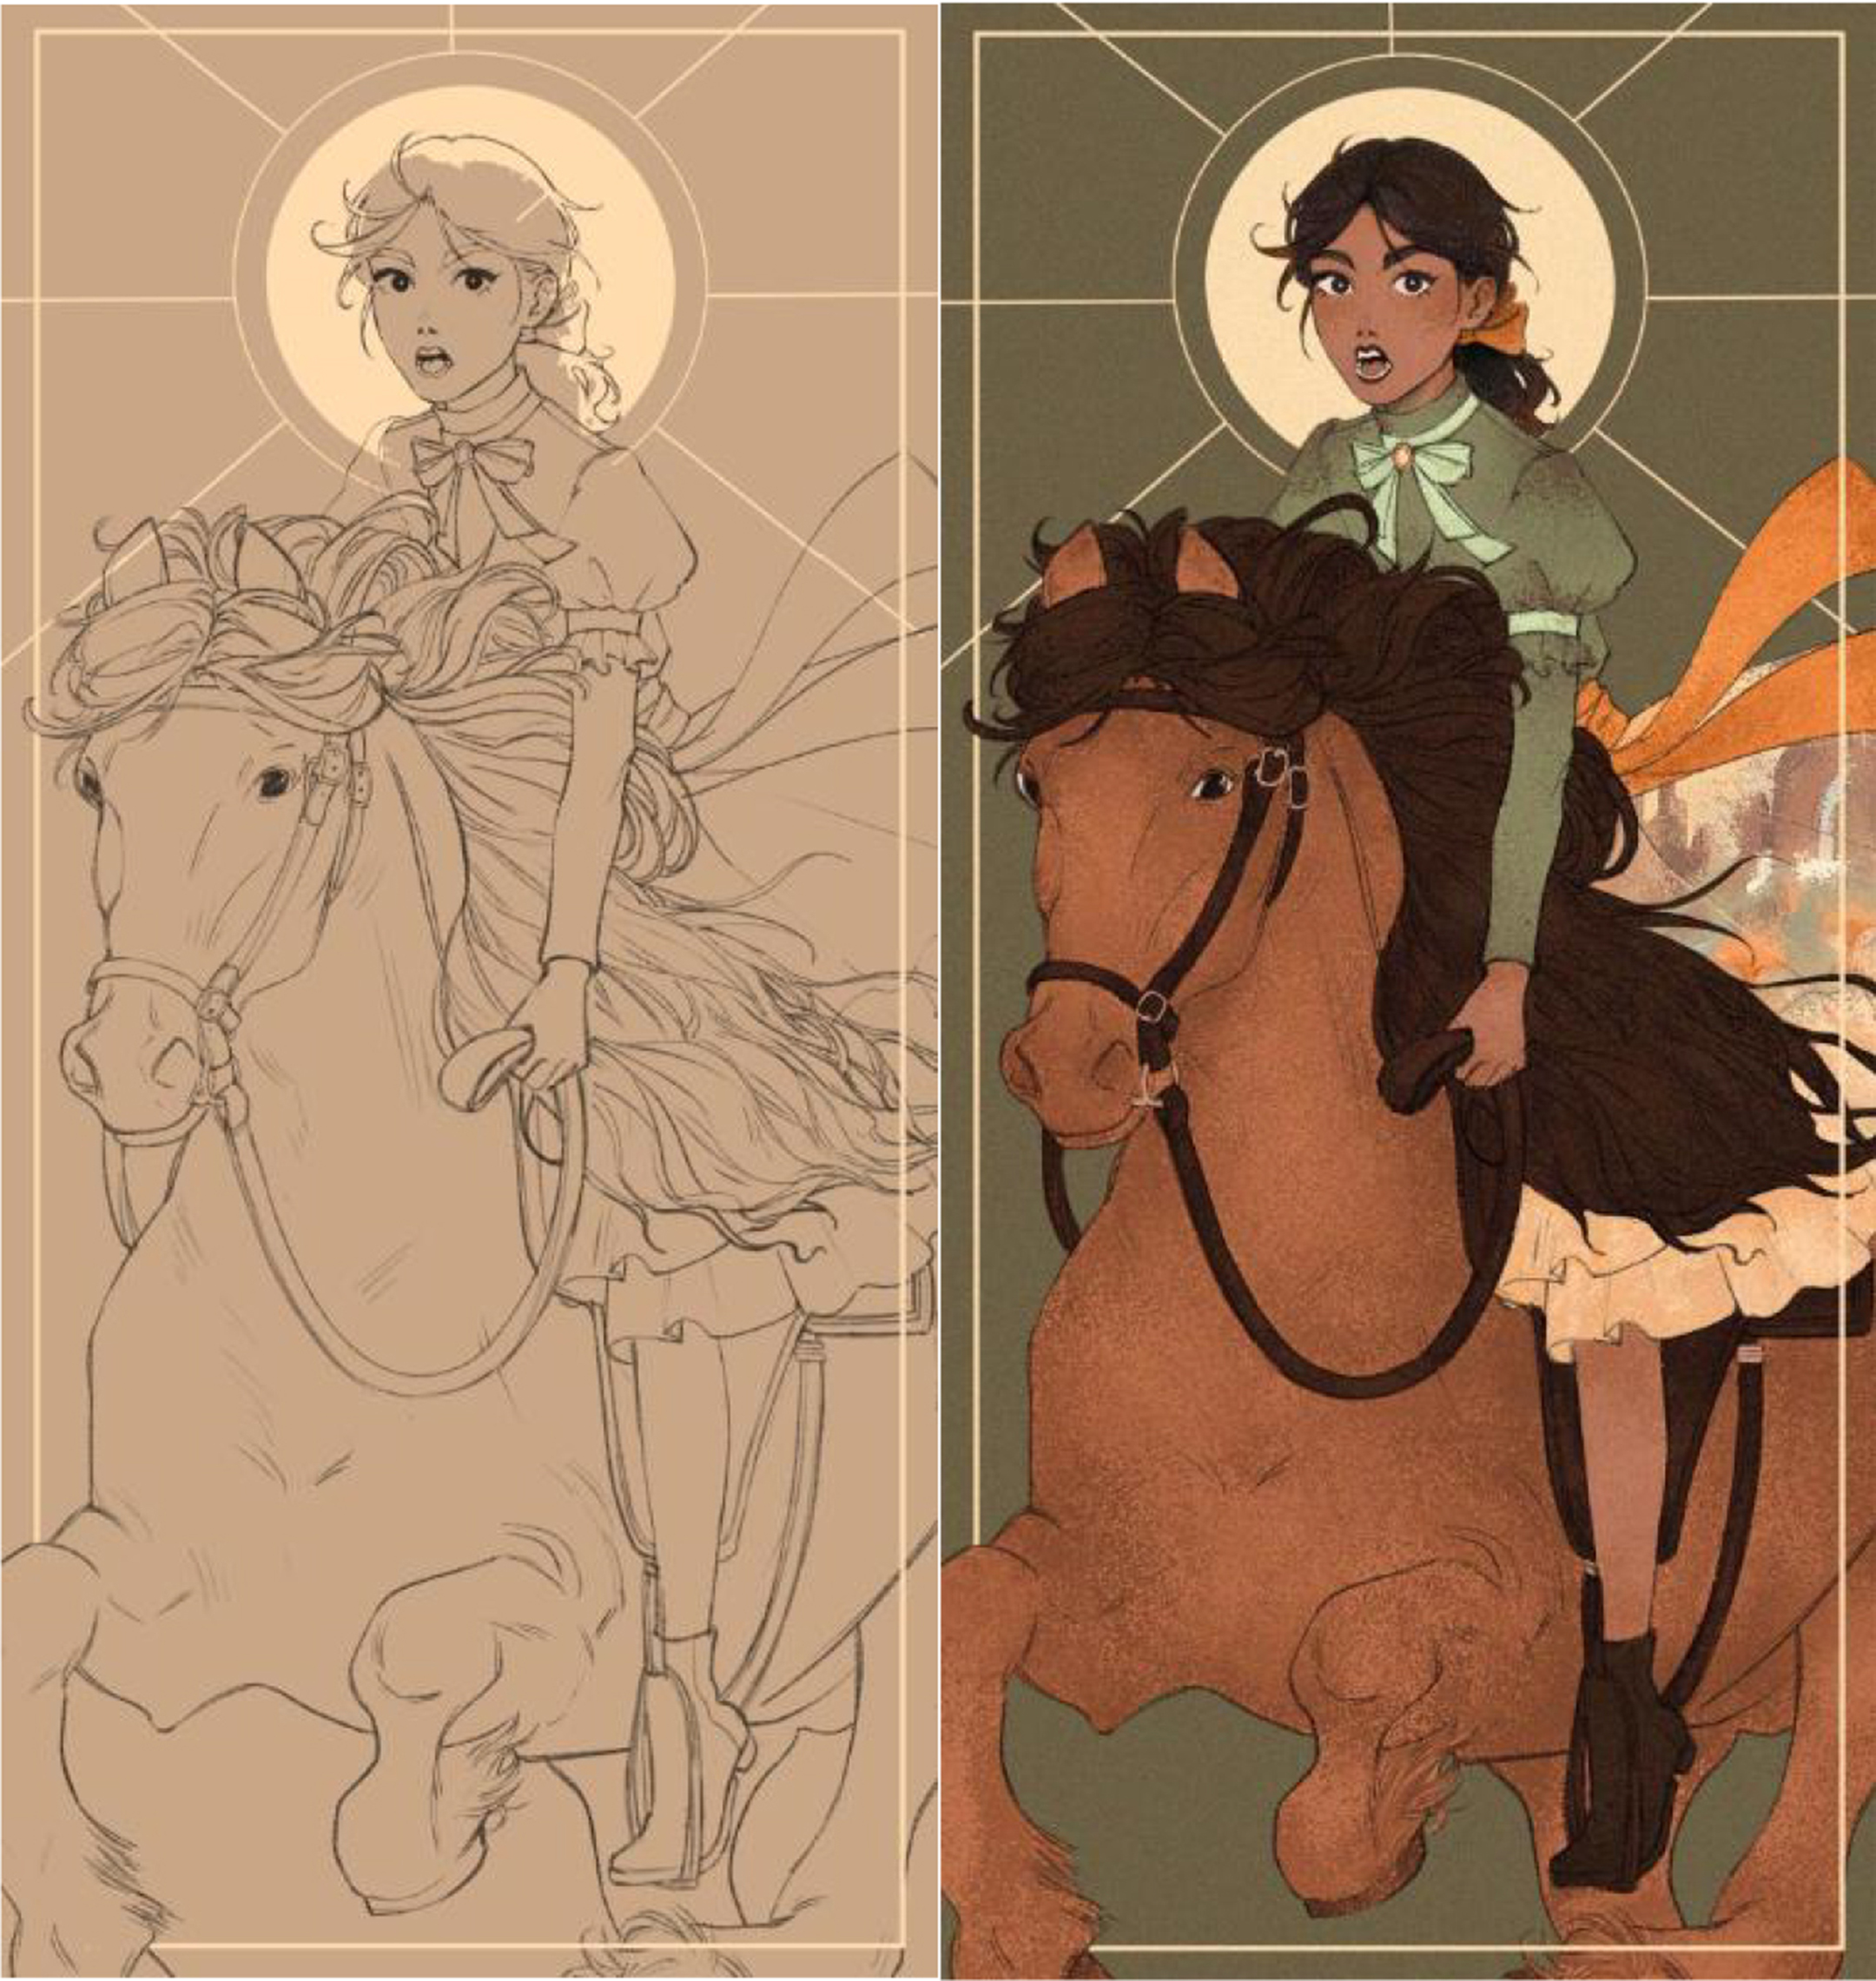 Two images, side by side, of the same illustration of a young woman on horseback, the one on the left a black and white sketch and the one on the right is final